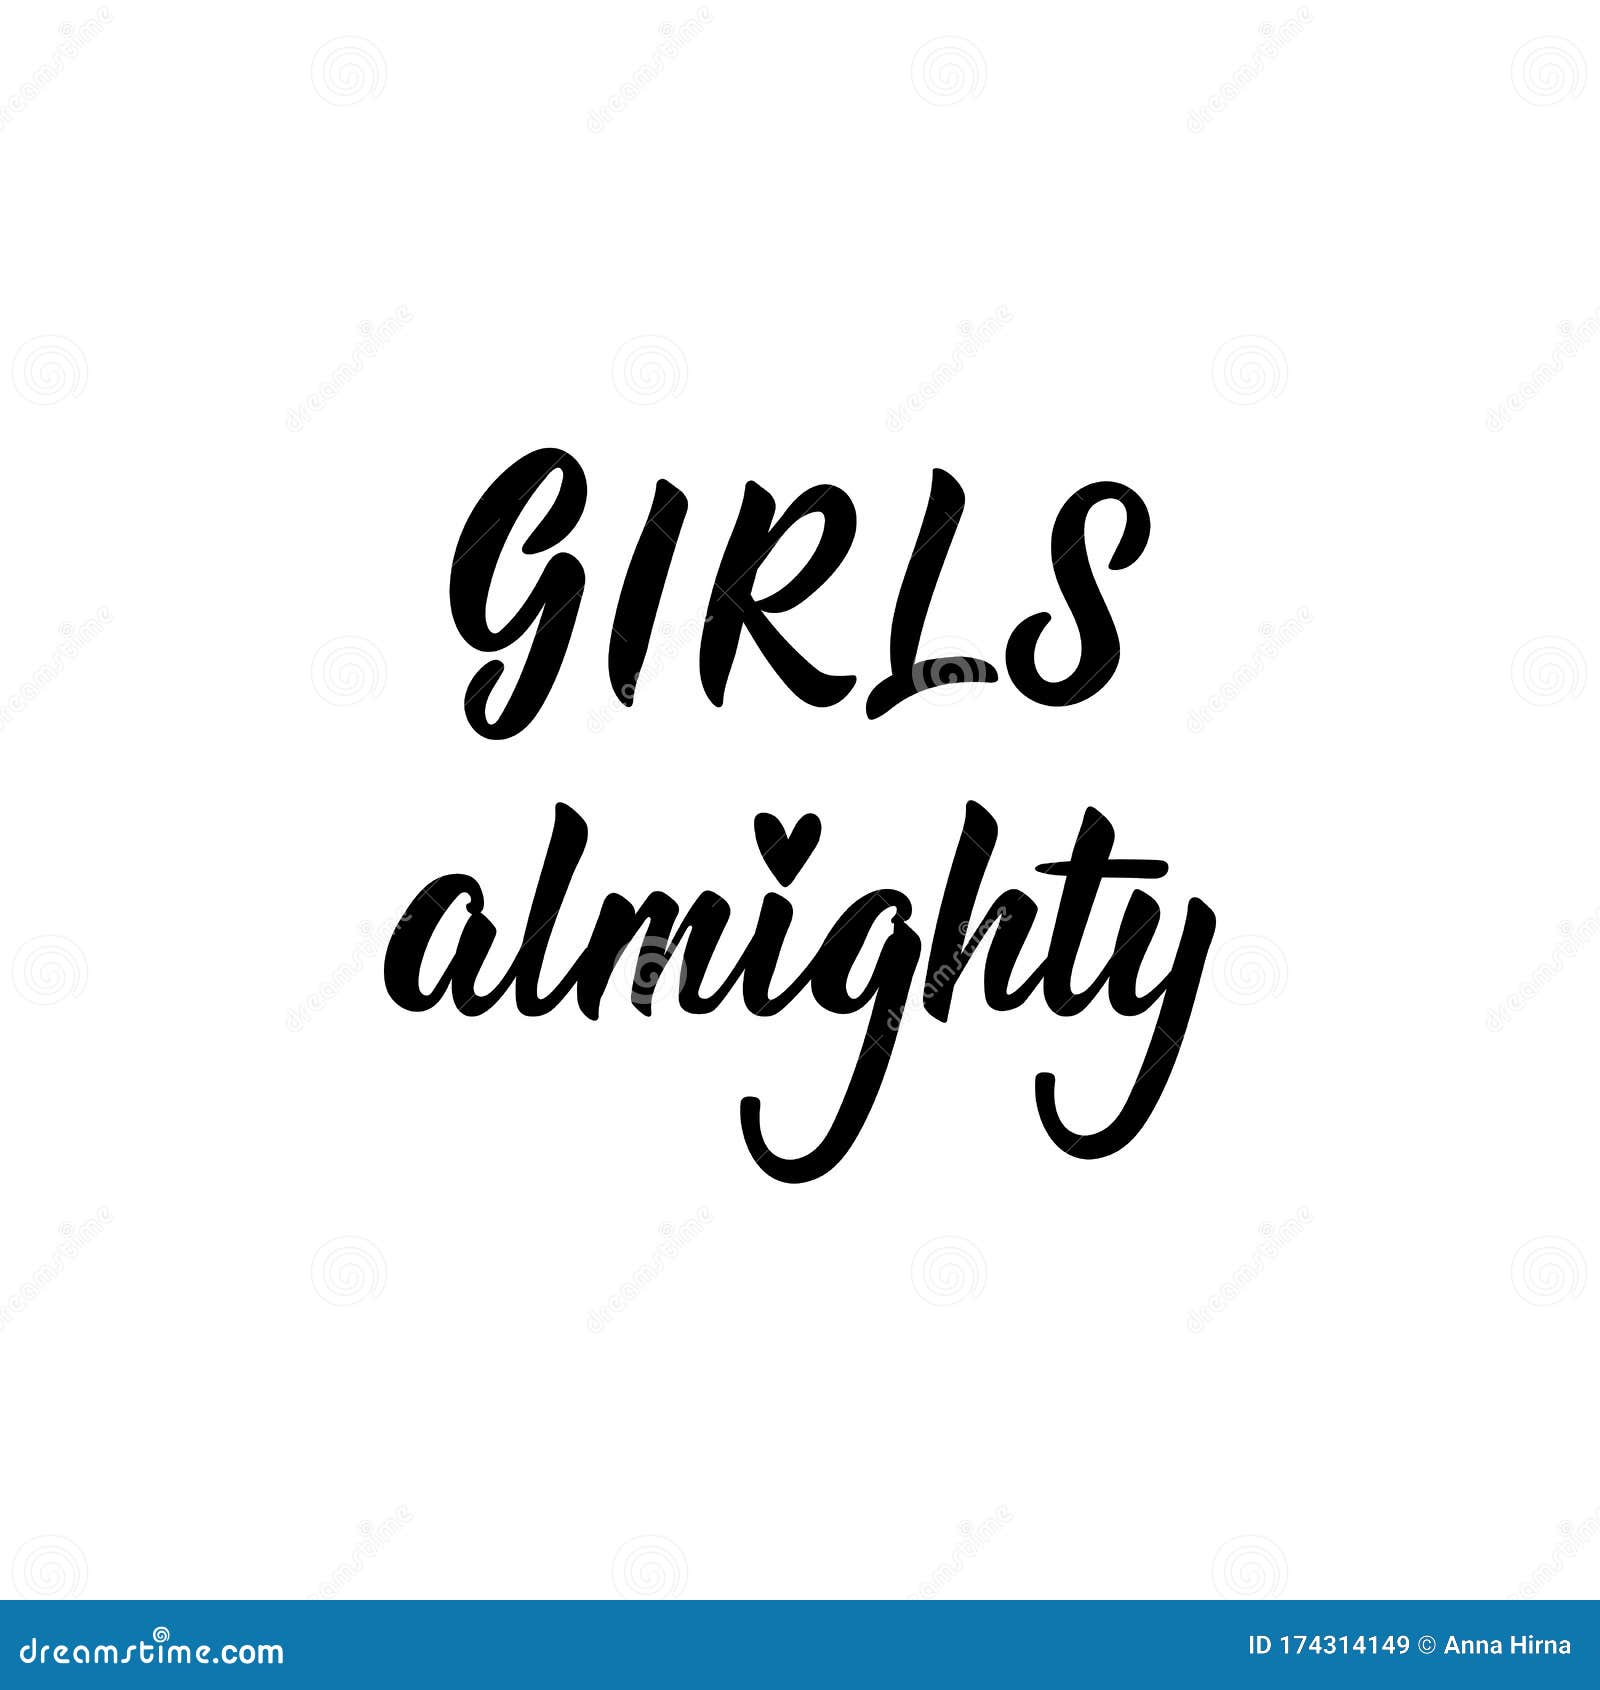 https://thumbs.dreamstime.com/z/girls-almighty-lettering-calligraphy-vector-ink-illustration-feminist-quote-can-be-used-prints-bags-t-shirts-posters-cards-174314149.jpg